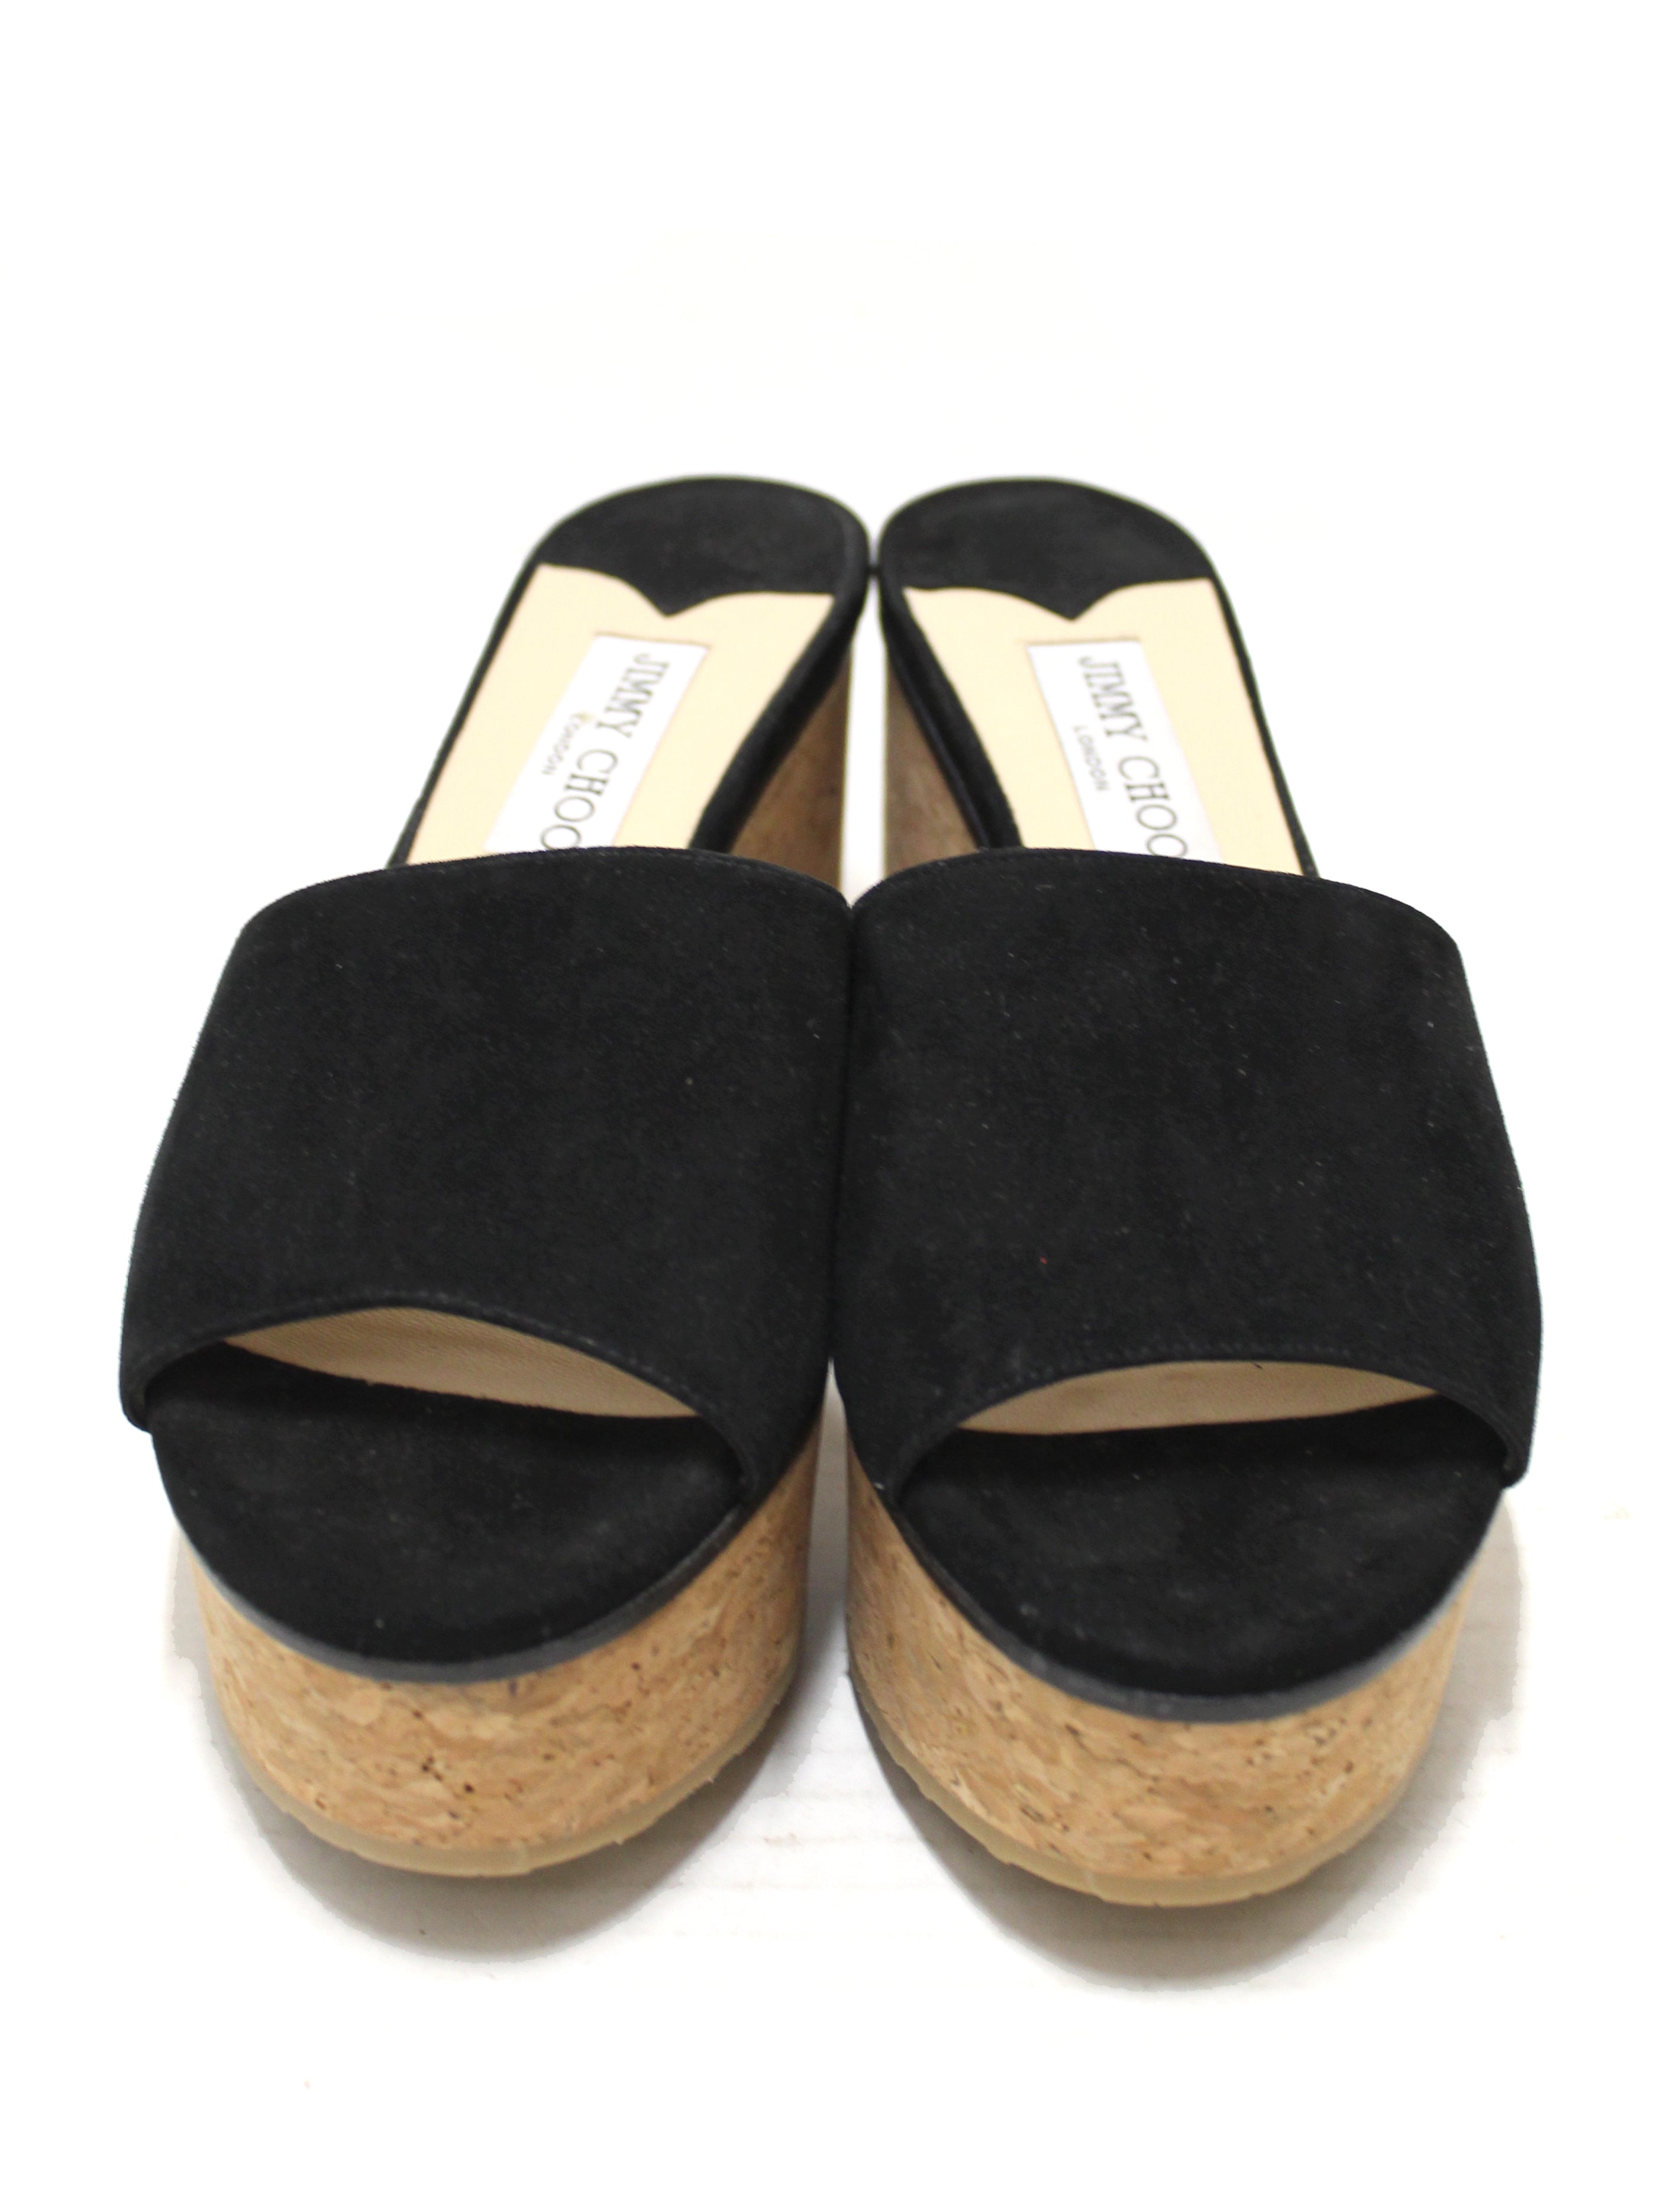 Authentic Jimmy Choo Black Suede Leather Cork Wedge Platform Heel Shoes size 39